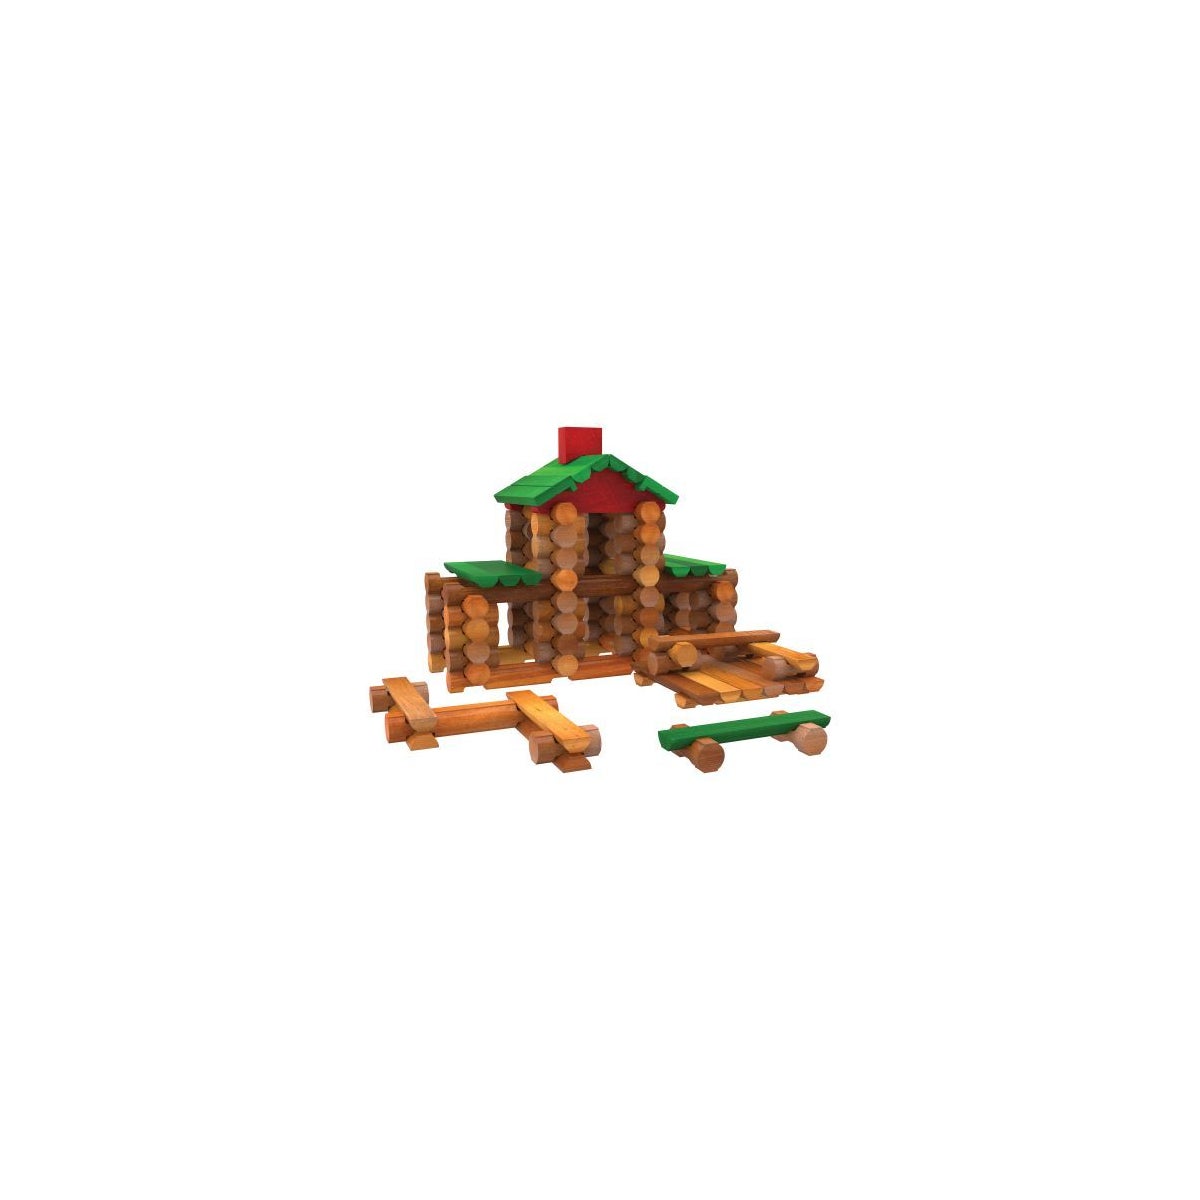 LINCOLN LOGS - 117PC CLASSIC MEETING HOUSE (1) ENG